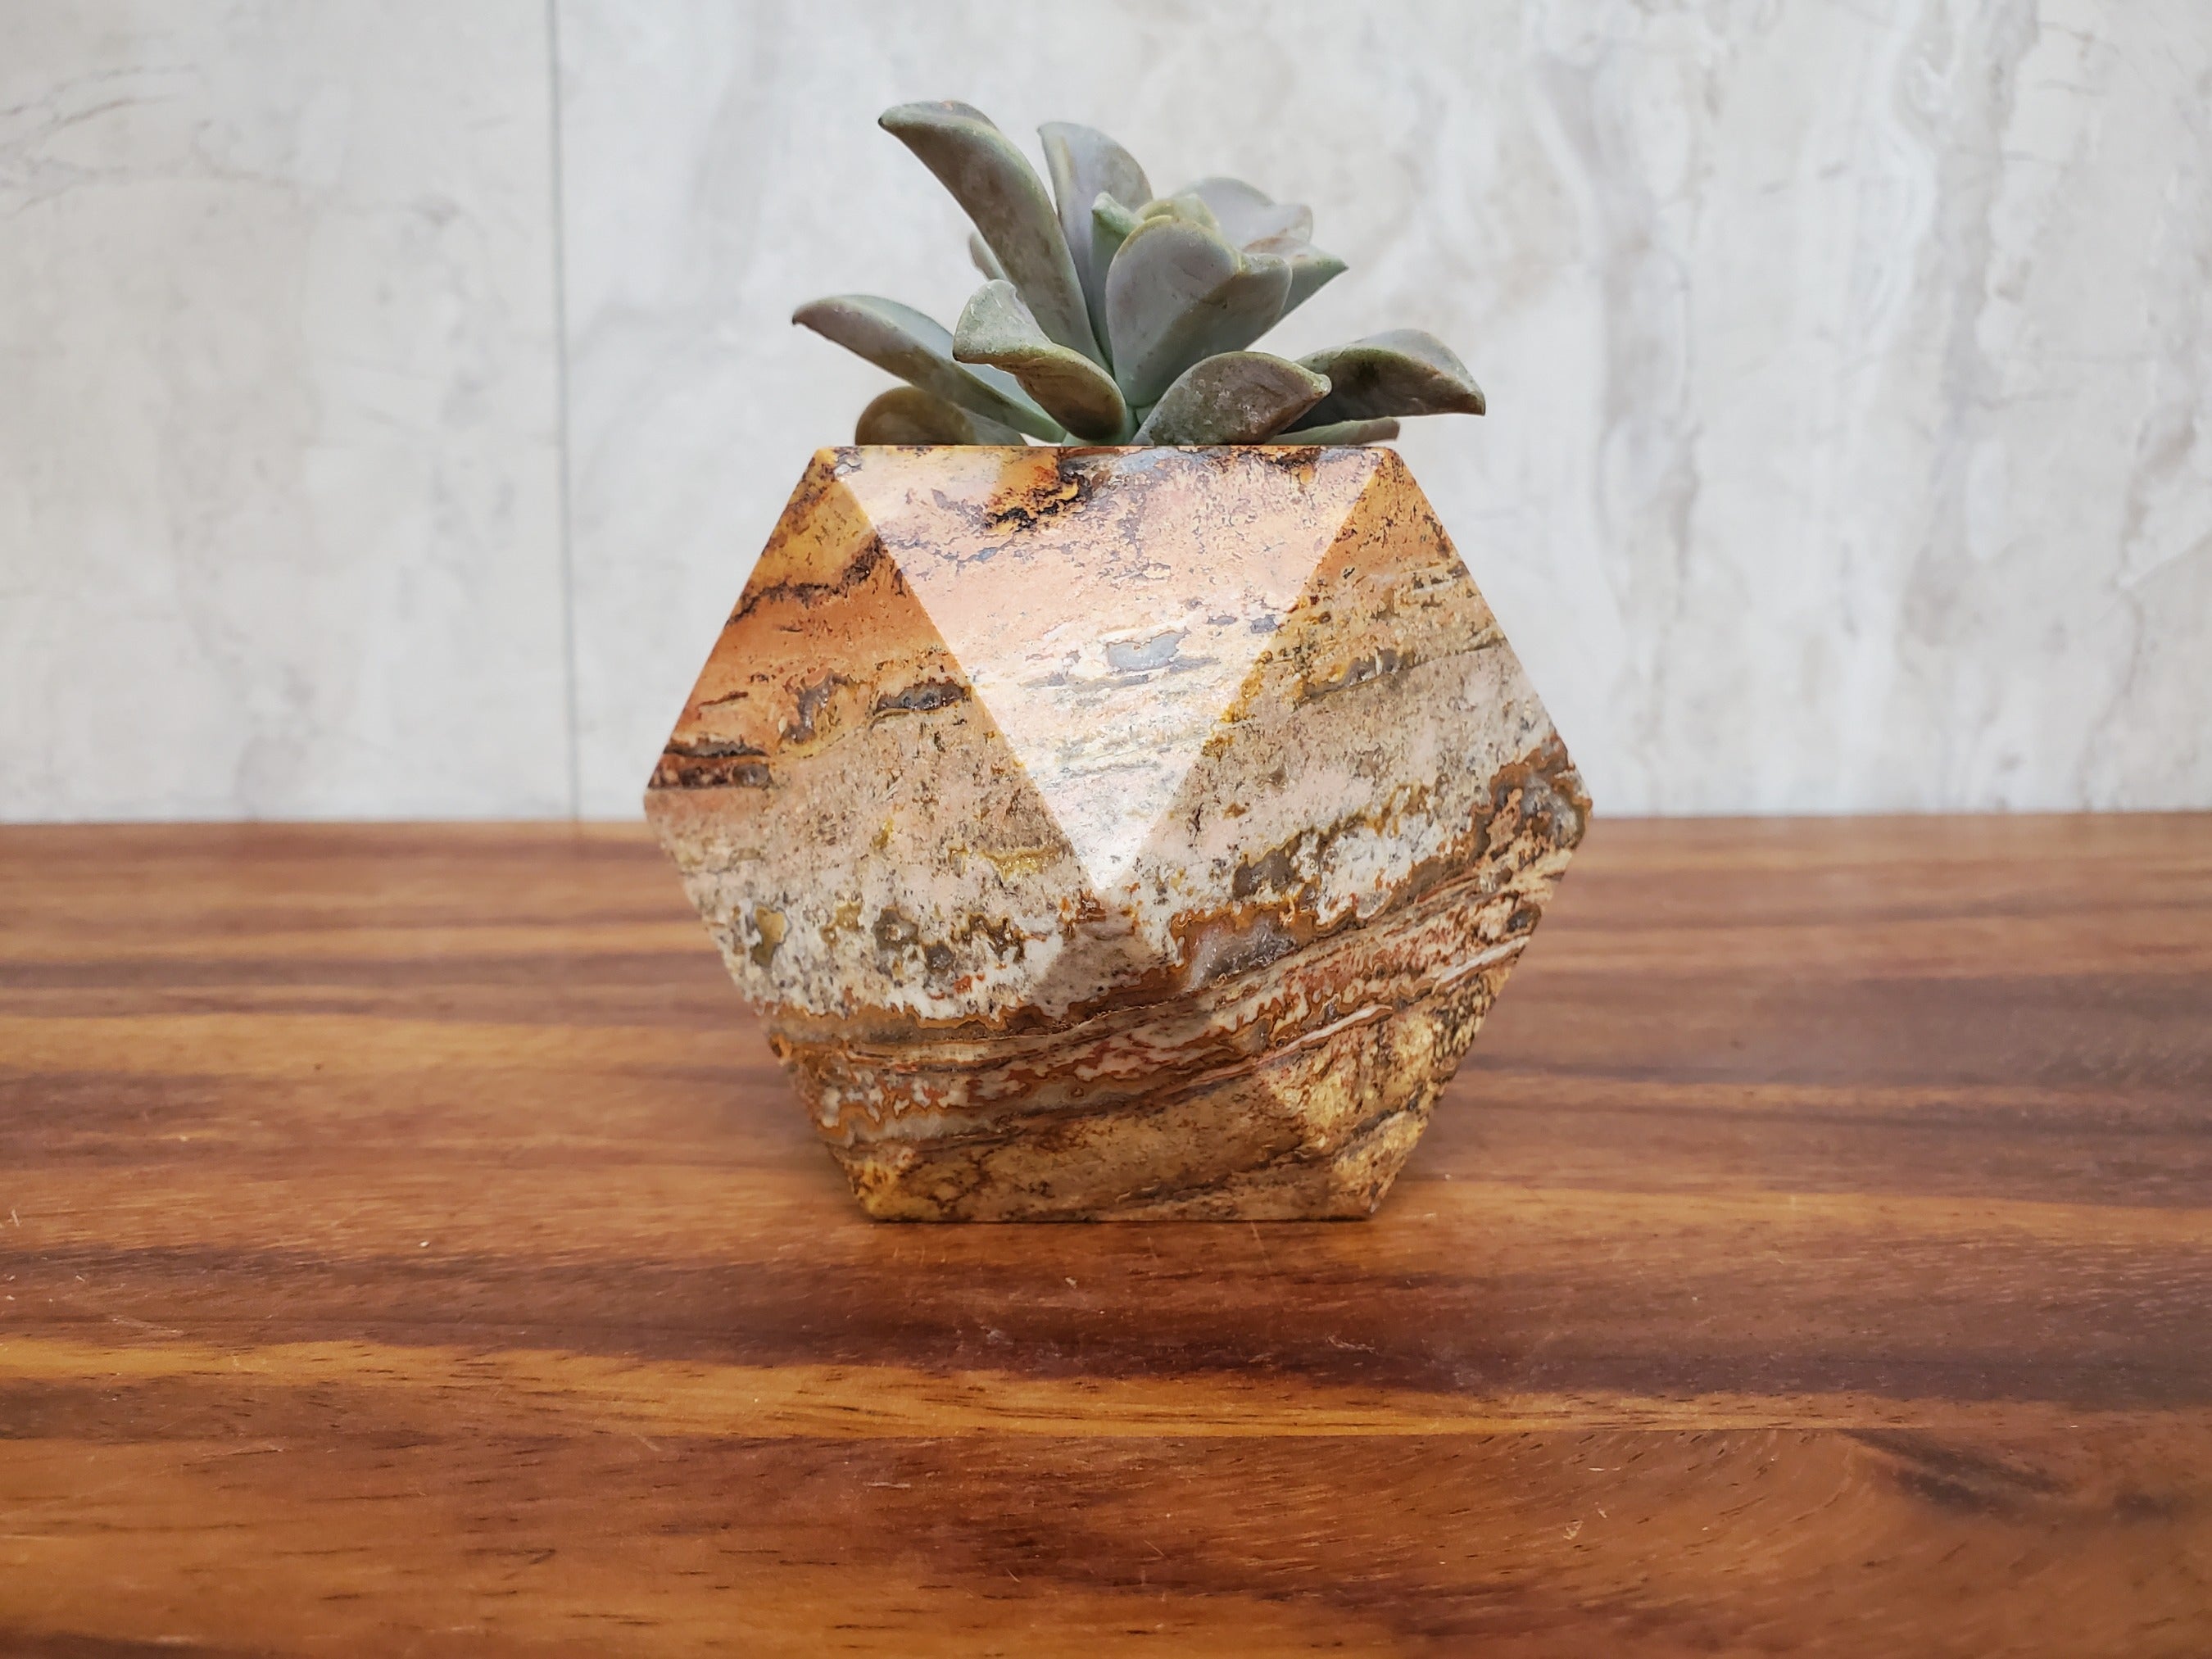 Red Orange Travertine Stone Geometric Mini Planter for Succulents and Terrariums. Handmade in Mexico. We ship and package from the USA. Buy now at www.felipeandgrace.com.